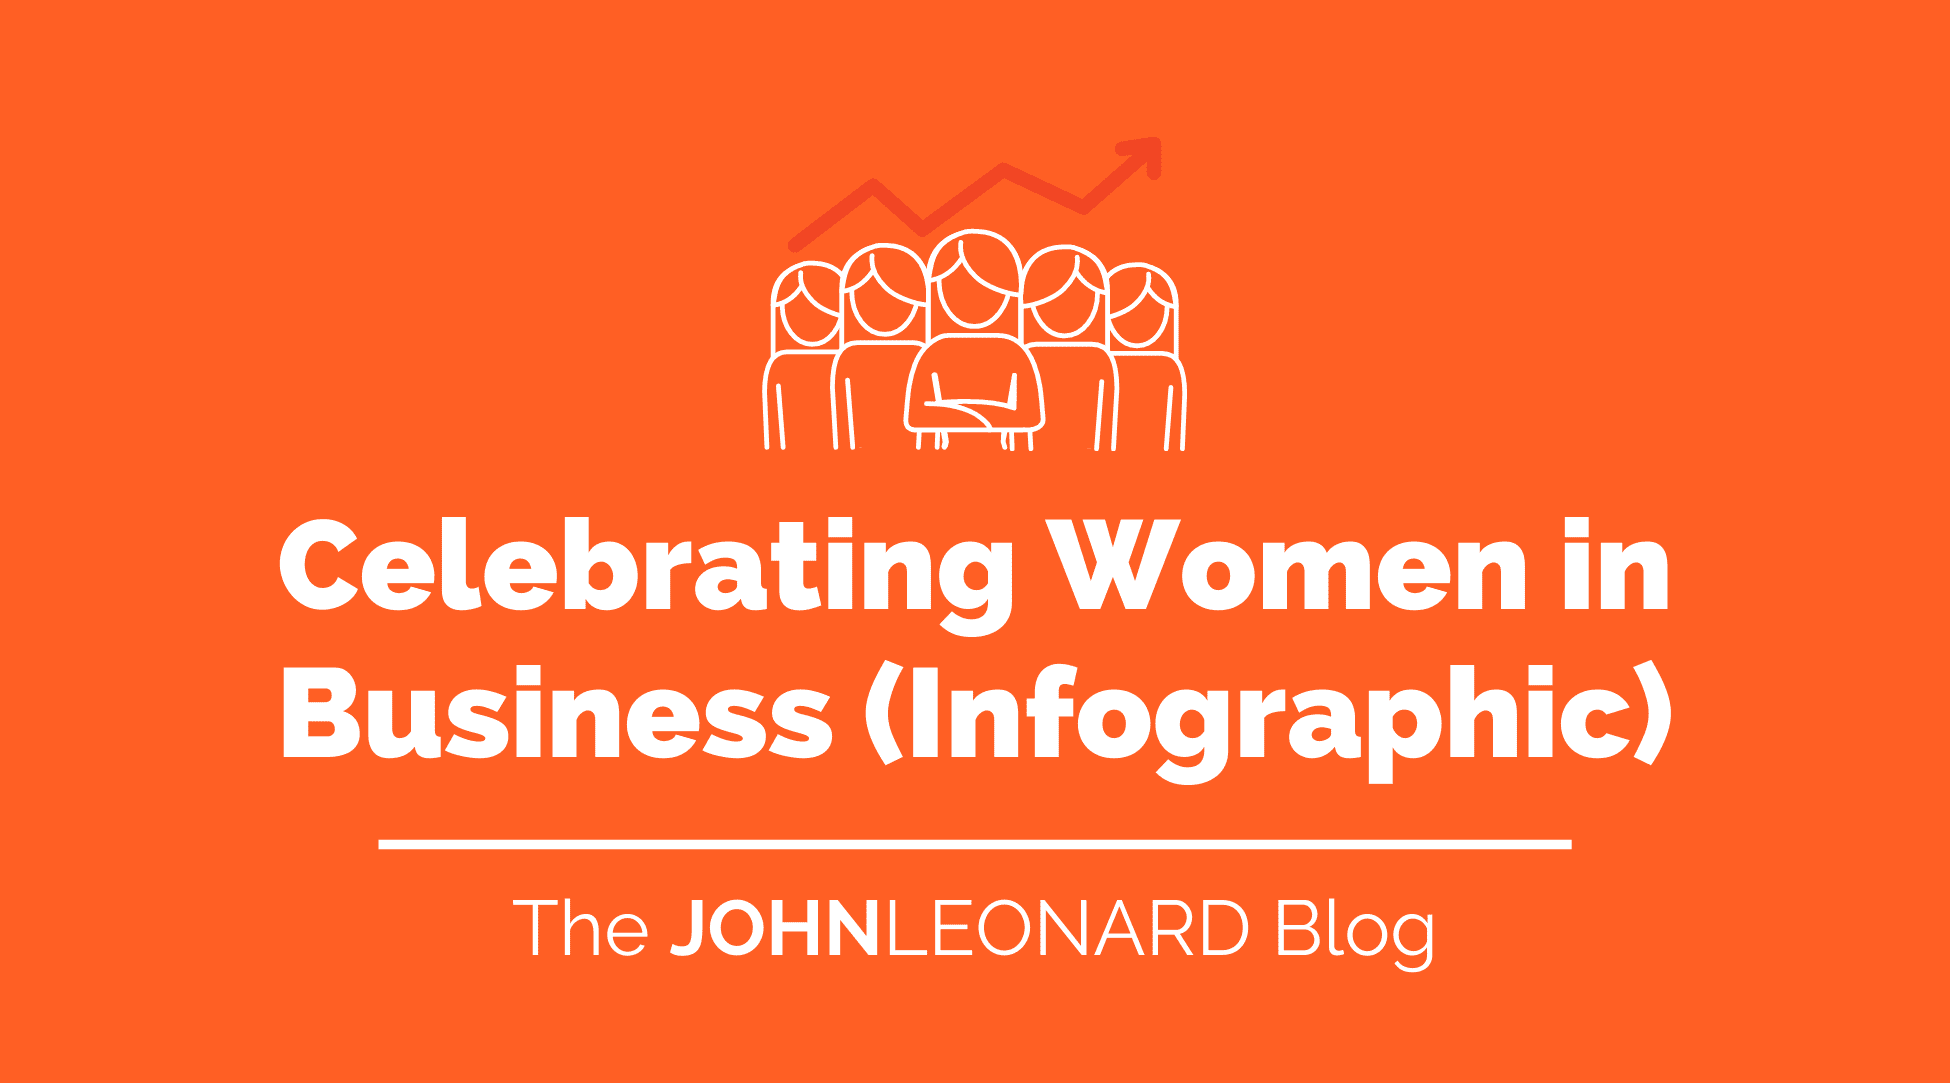 Women in Business (Infographic)